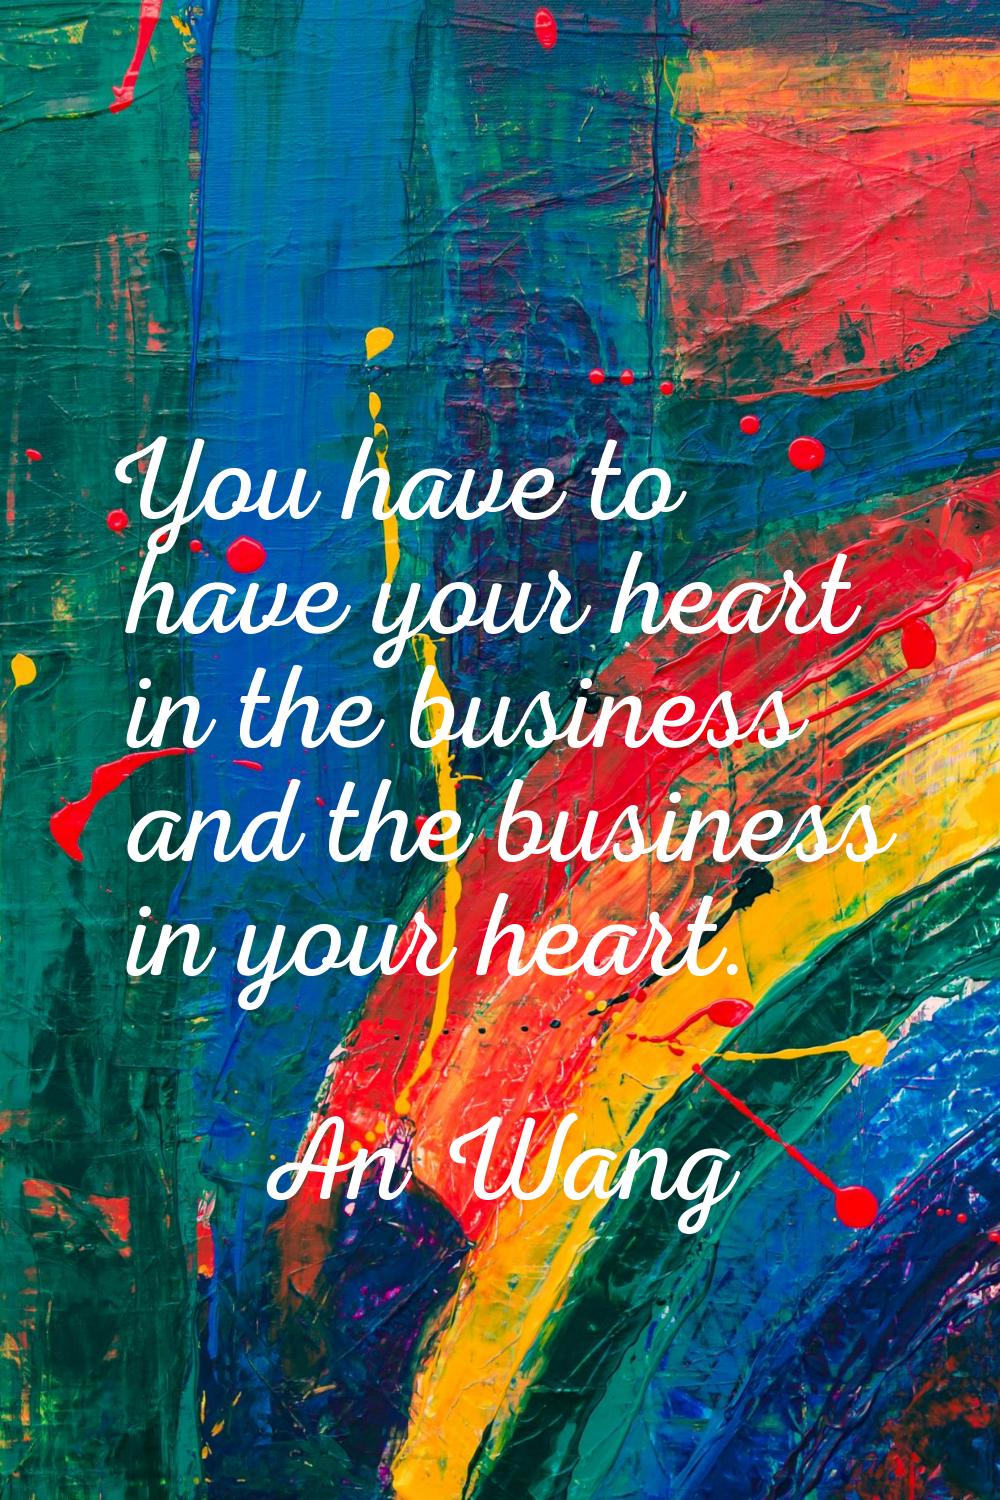 You have to have your heart in the business and the business in your heart.